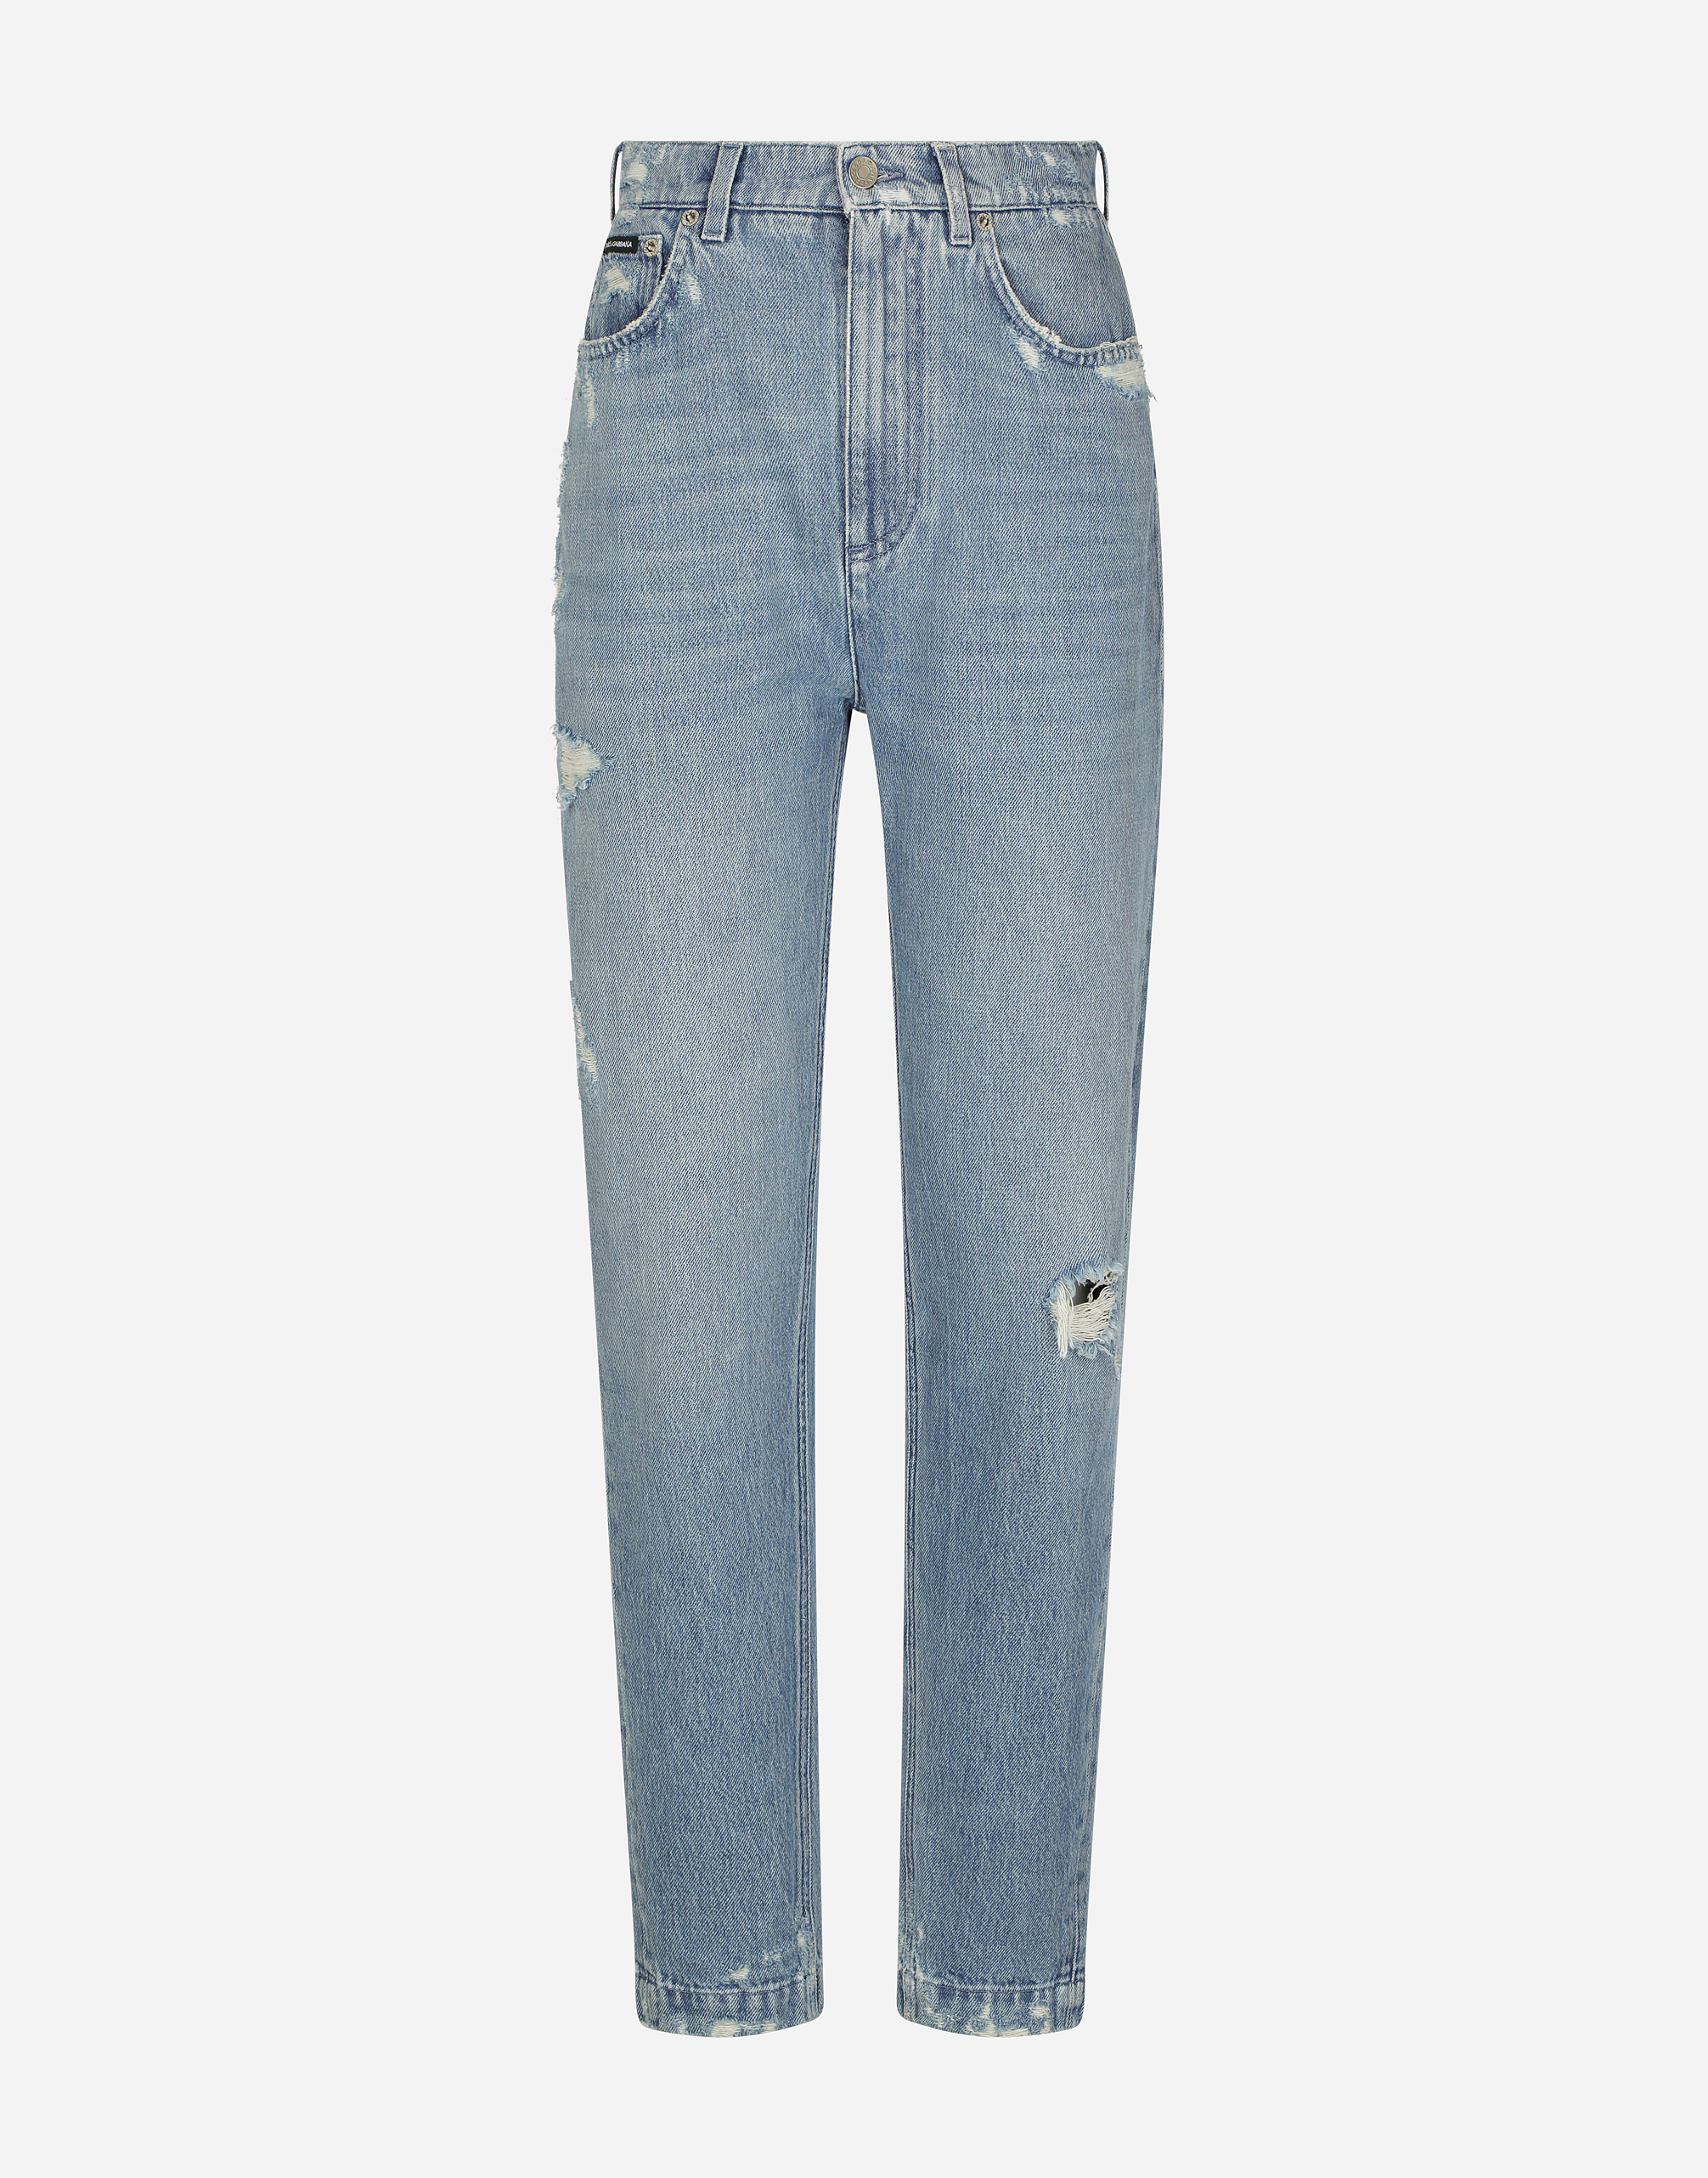 Jeans with mini-ripped details in Multicolor